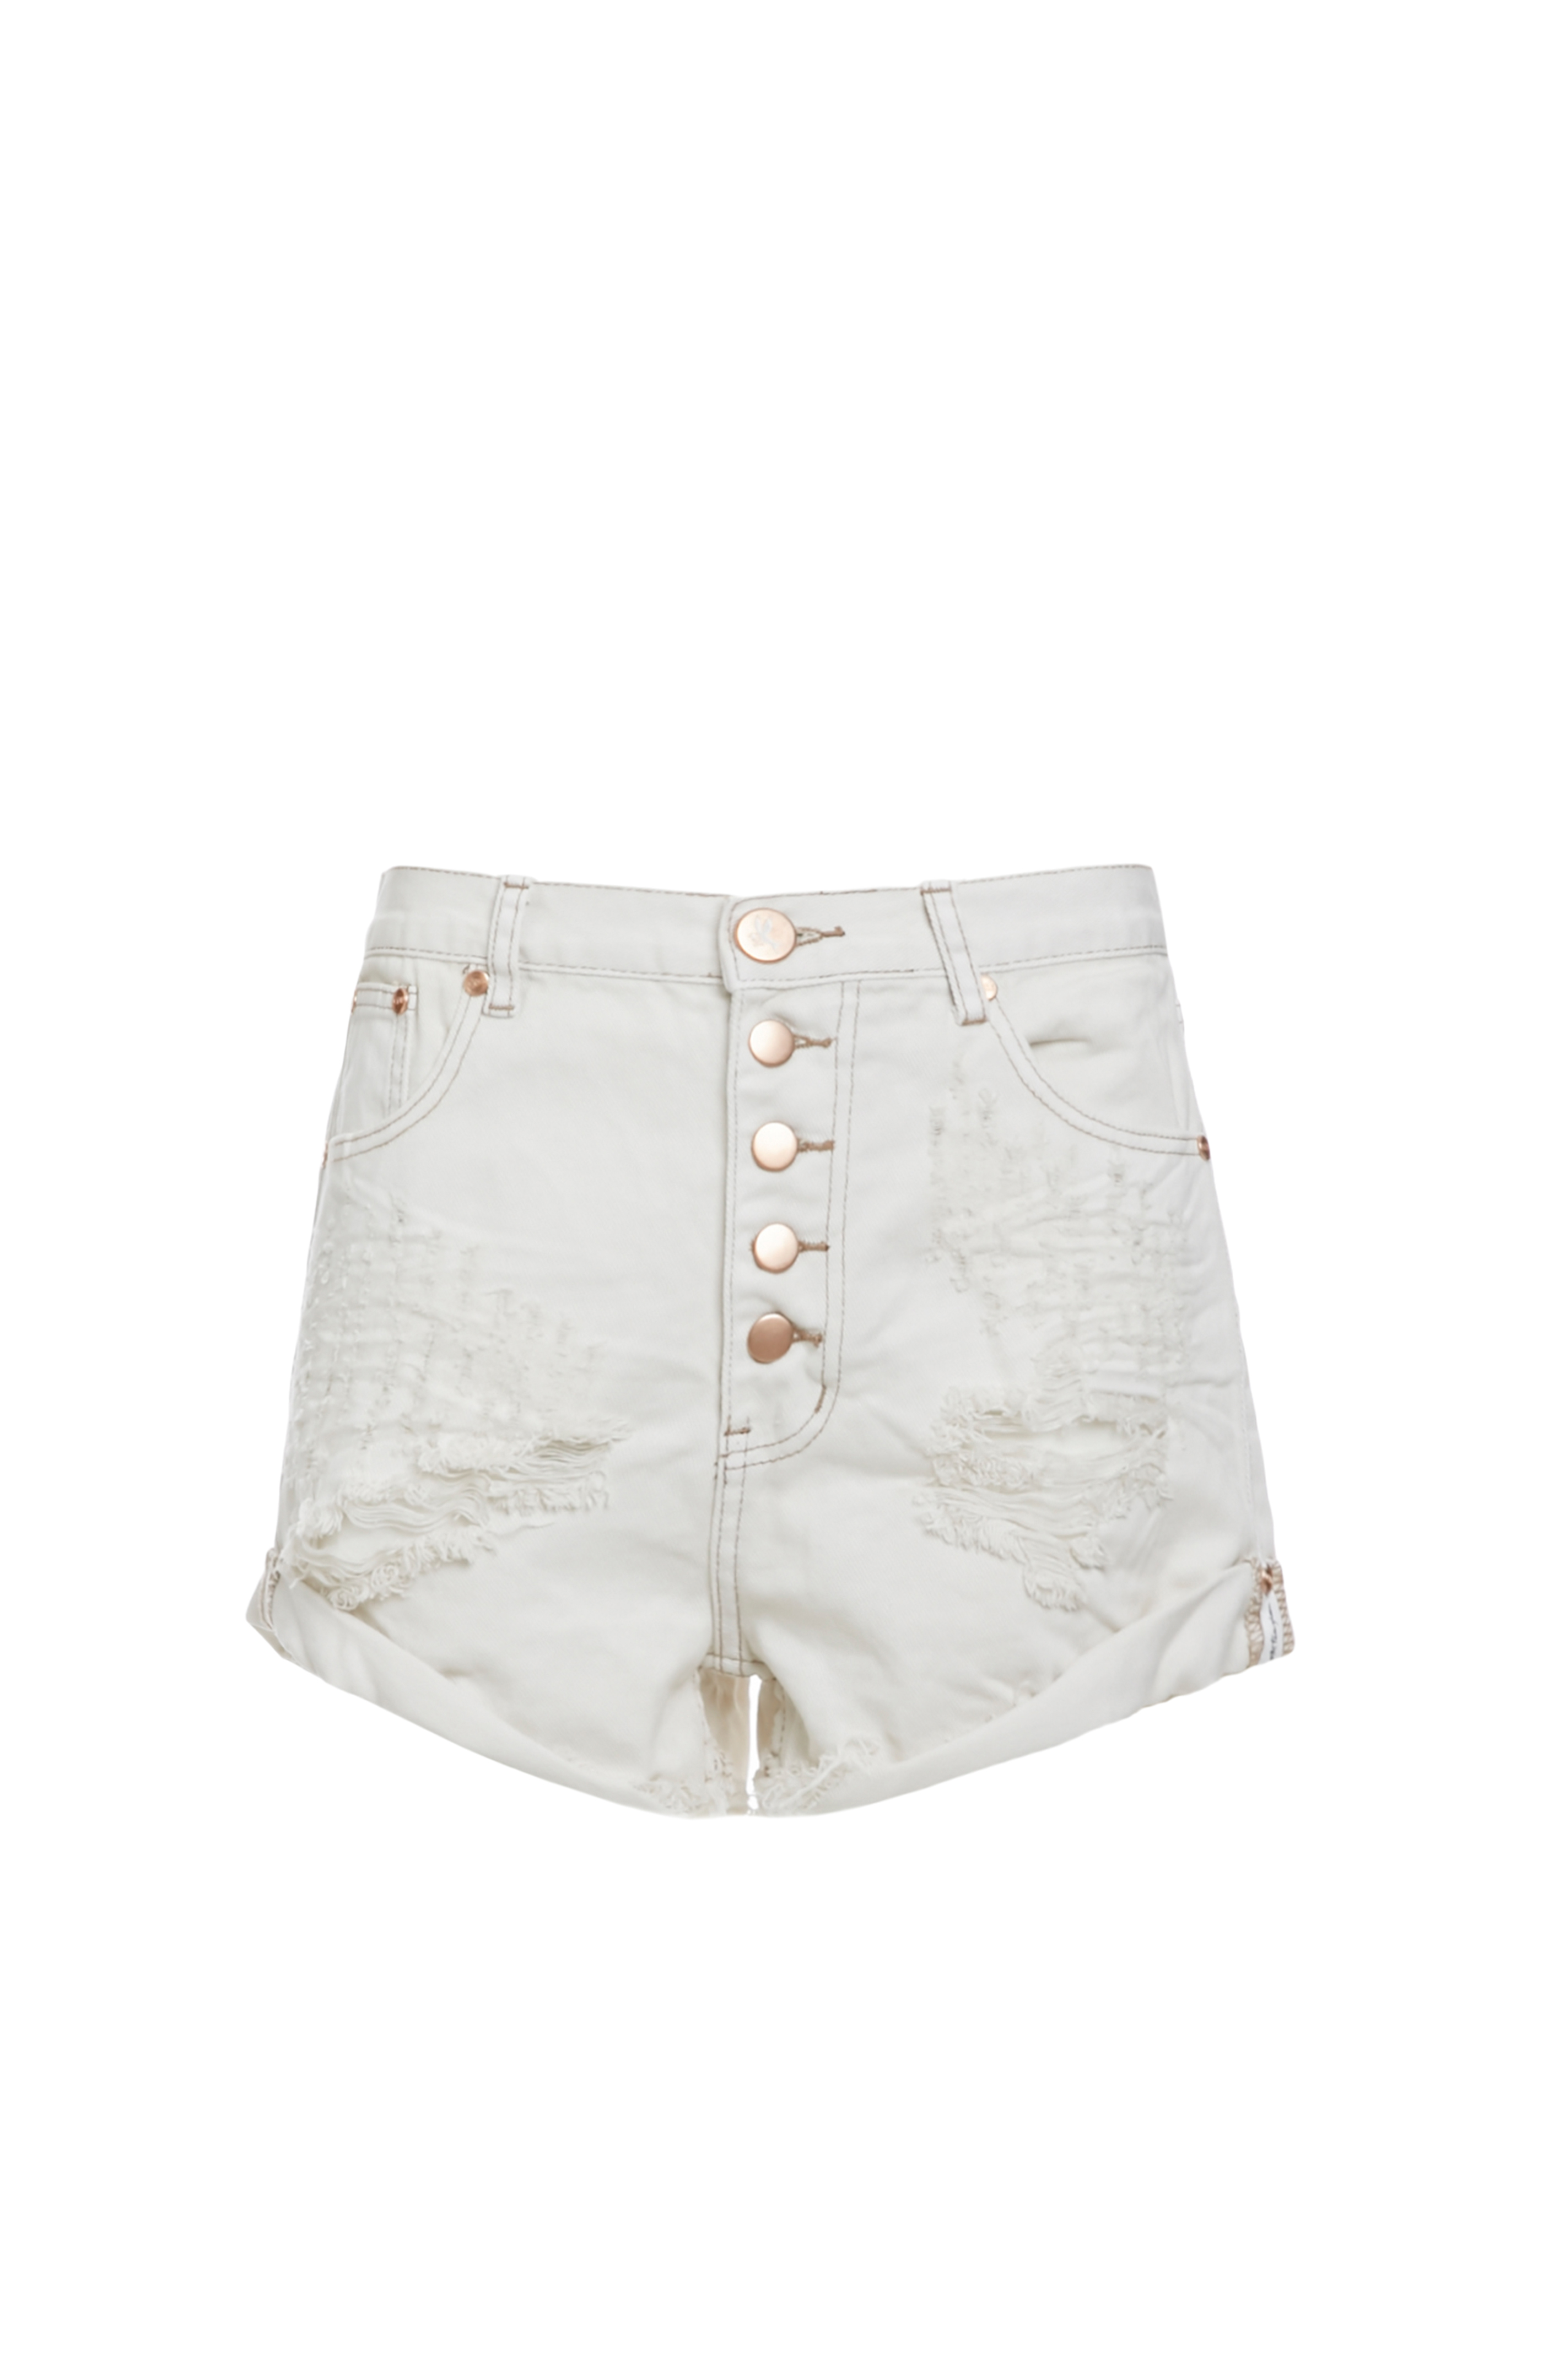 One Teaspoon Froste Outlaws Shorts in White | DAILYLOOK